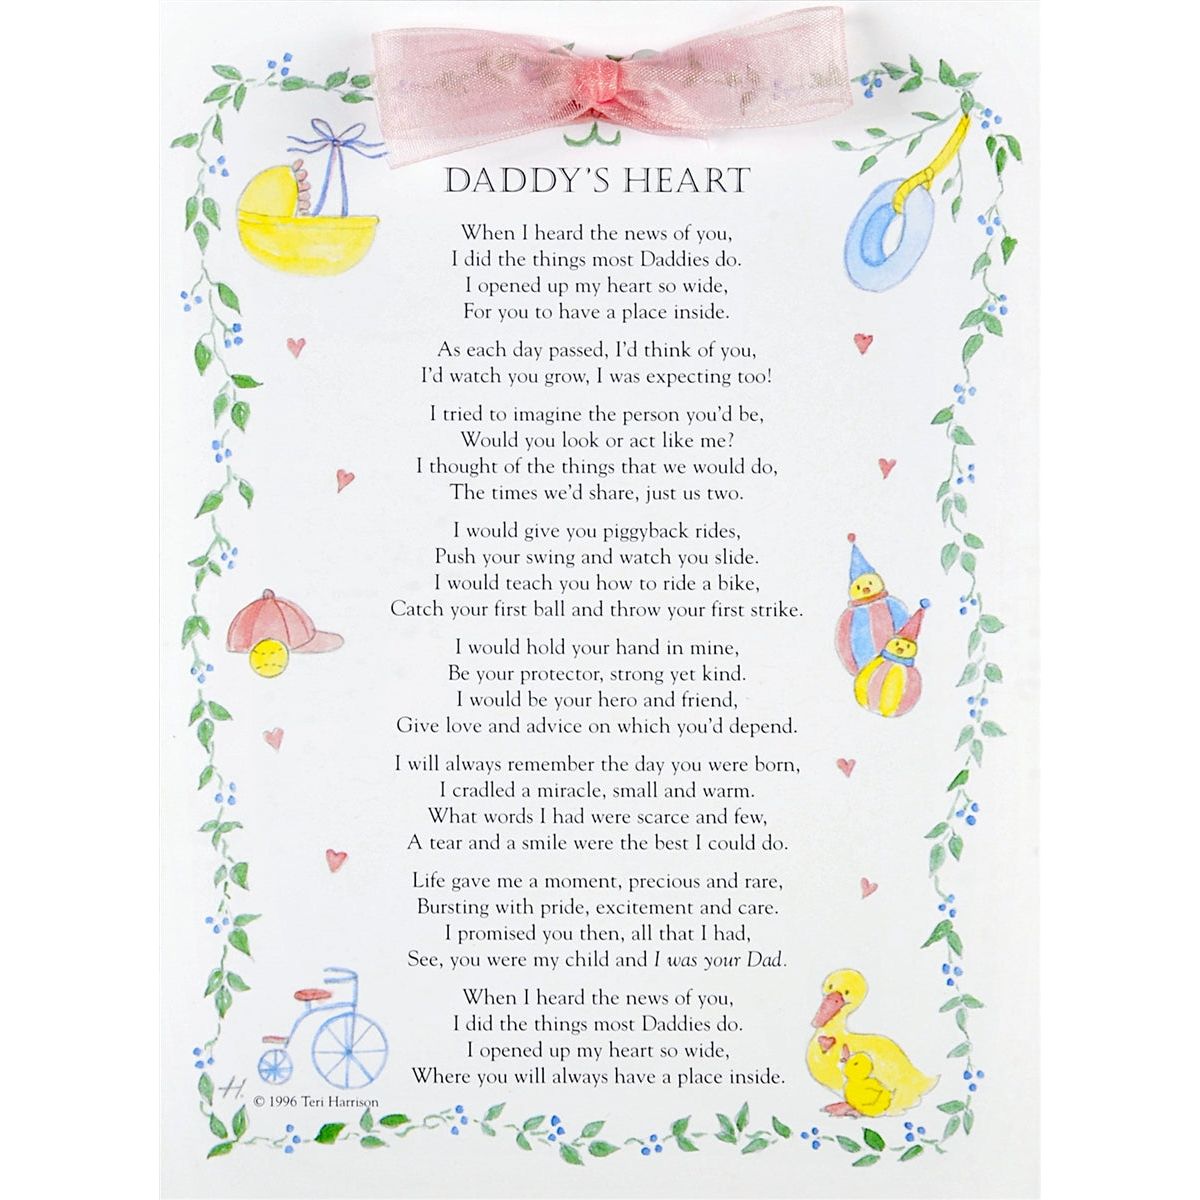 Daddy's Heart poem new baby greeting card 5x7 with envelope and pink organza accent ribbon.